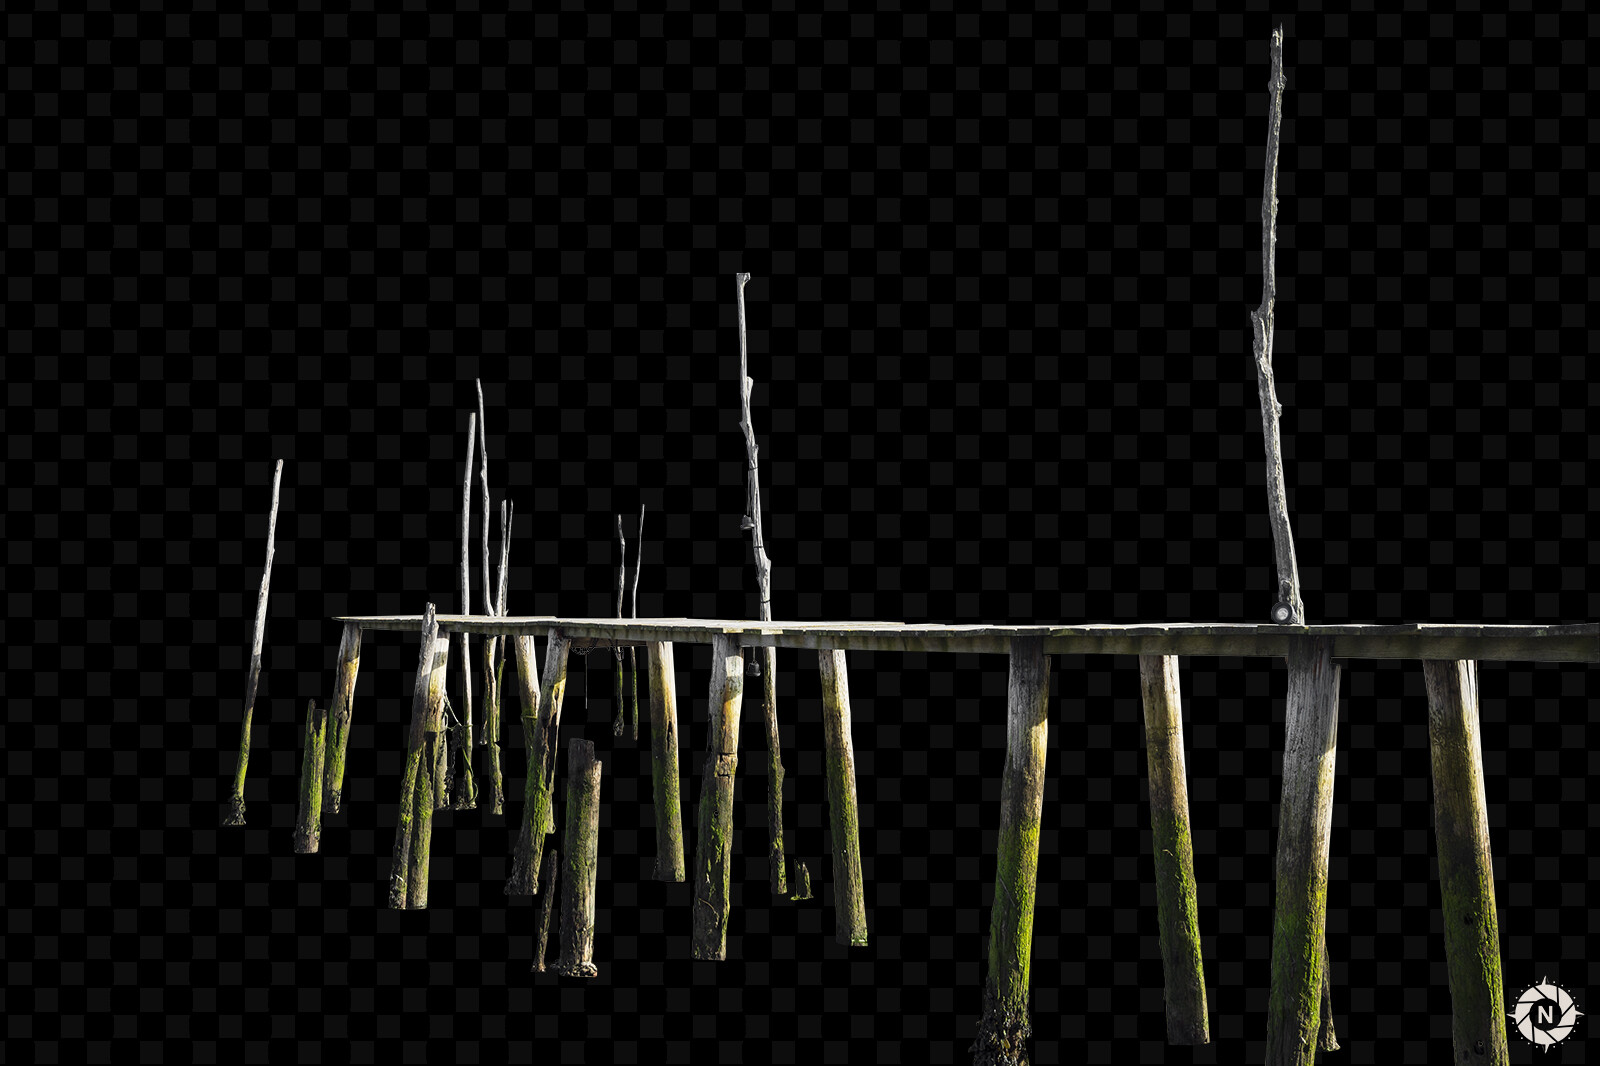 From the PNG Photo Pack: Wooden Structures

https://www.artstation.com/a/165845